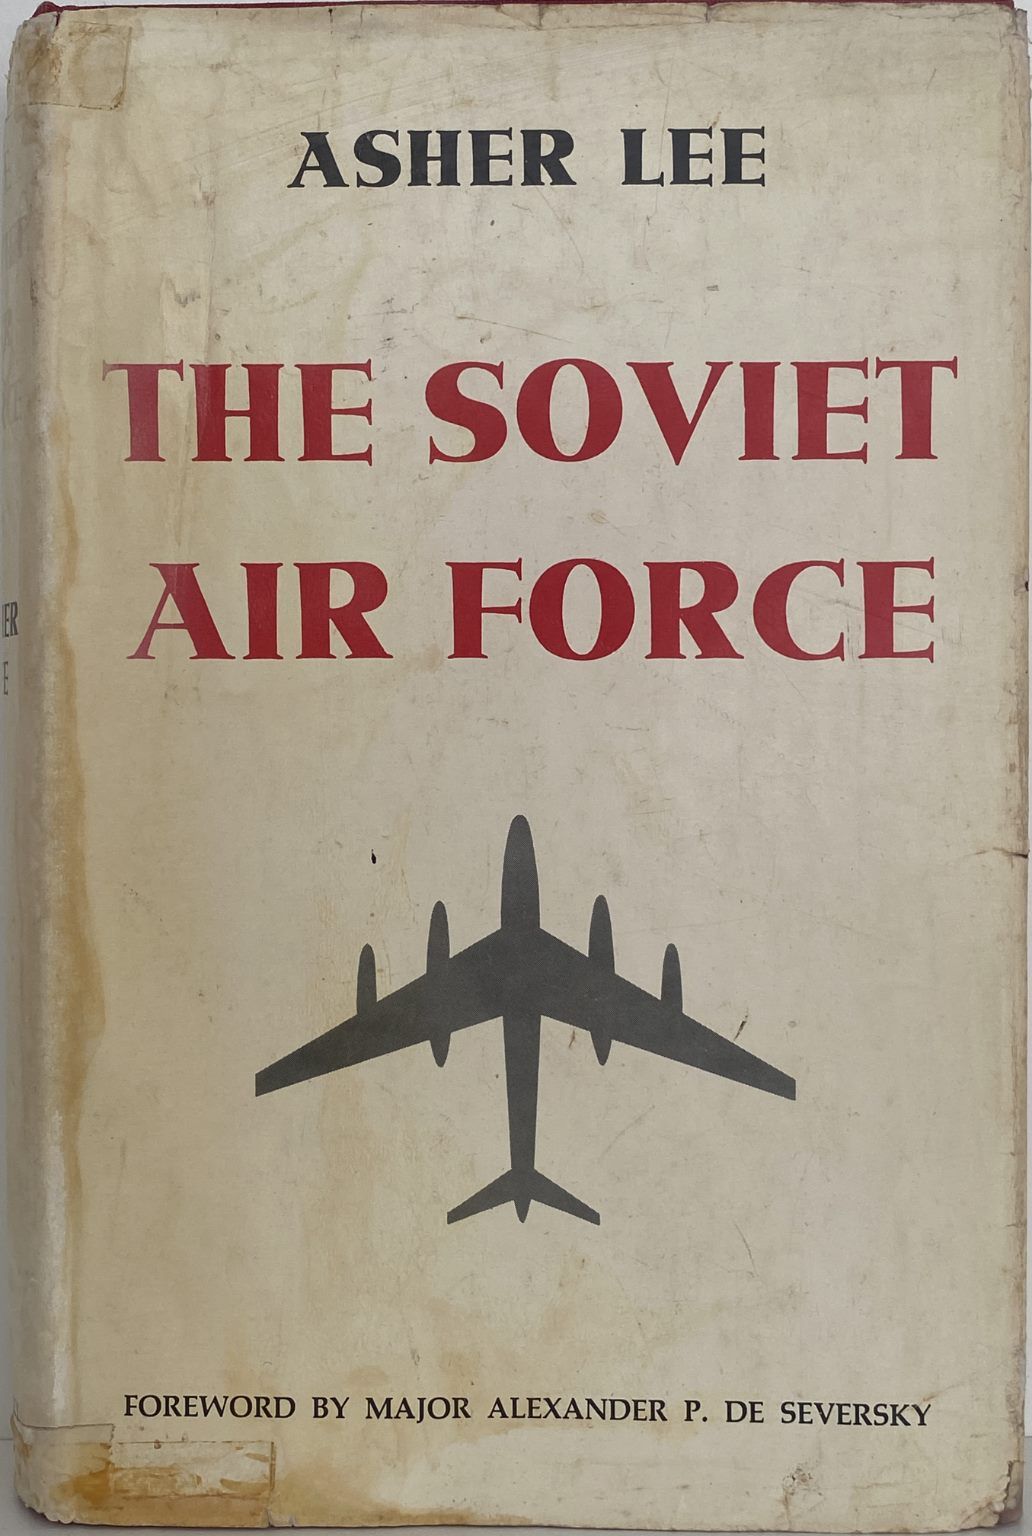 THE SOVIET AIR FORCE